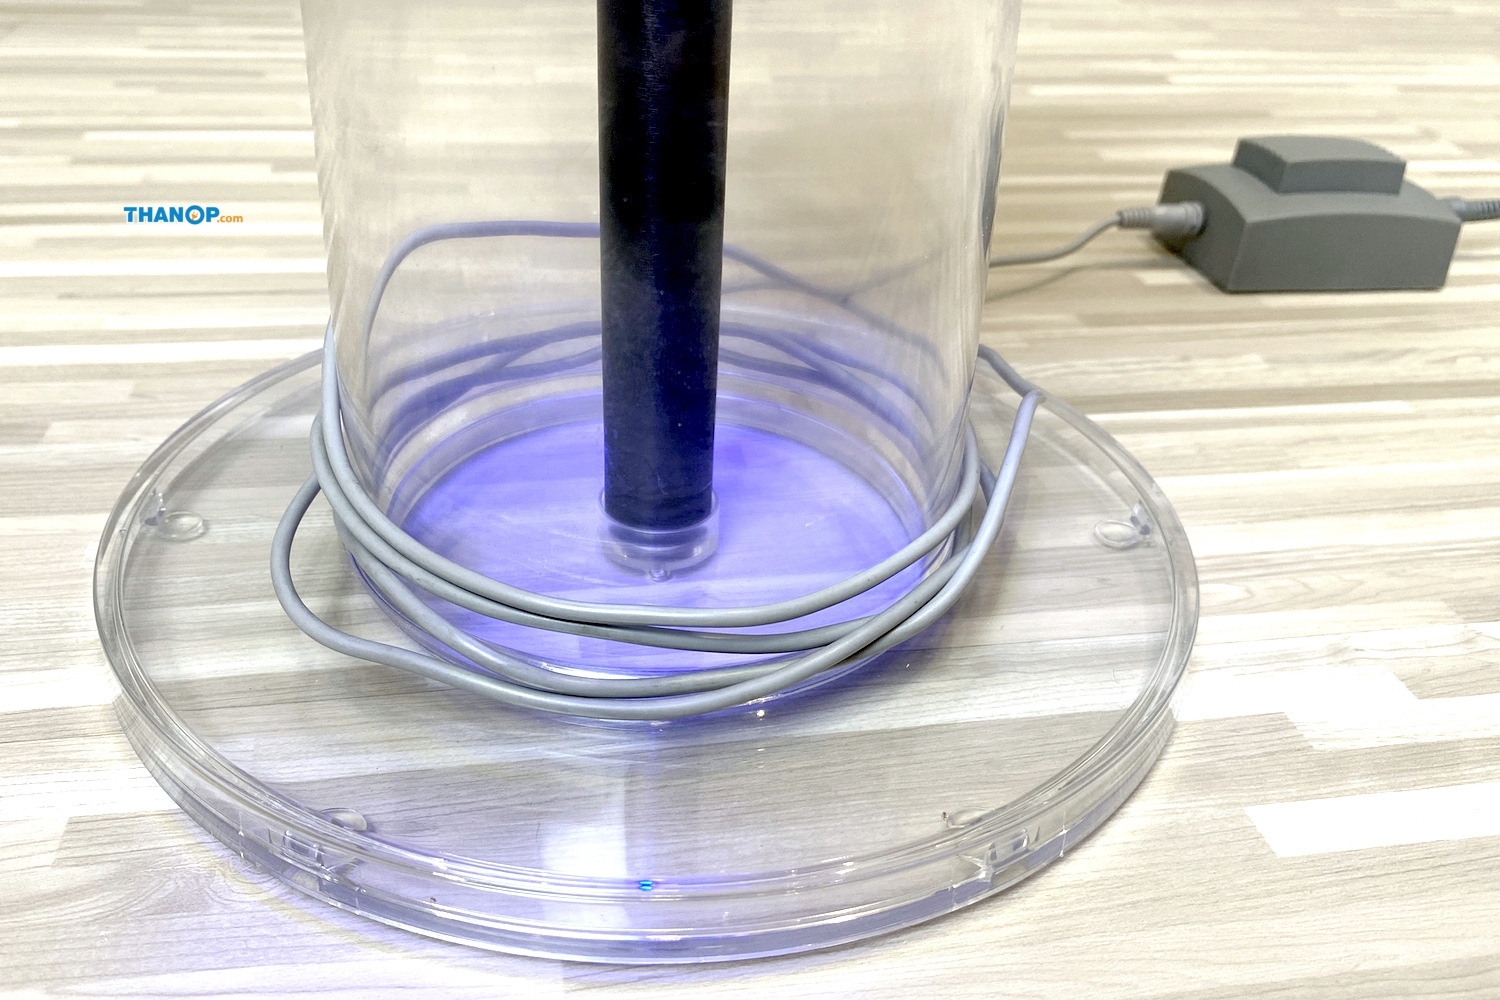 lightair-ionflow-evolution-acrylic-stand-with-led-light-on-reflection